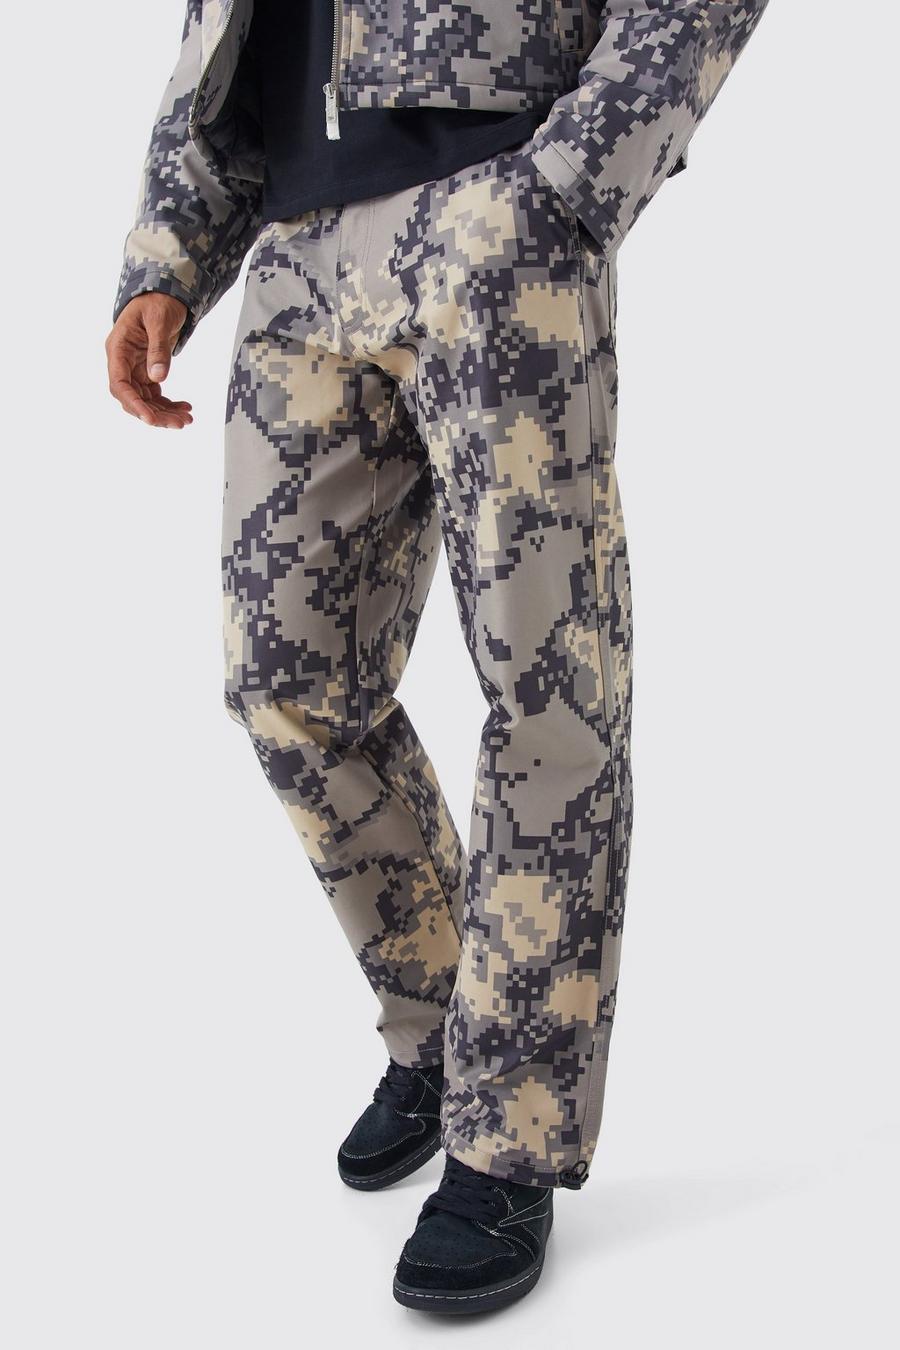 Stone Relaxed Pixelated Camo Pants